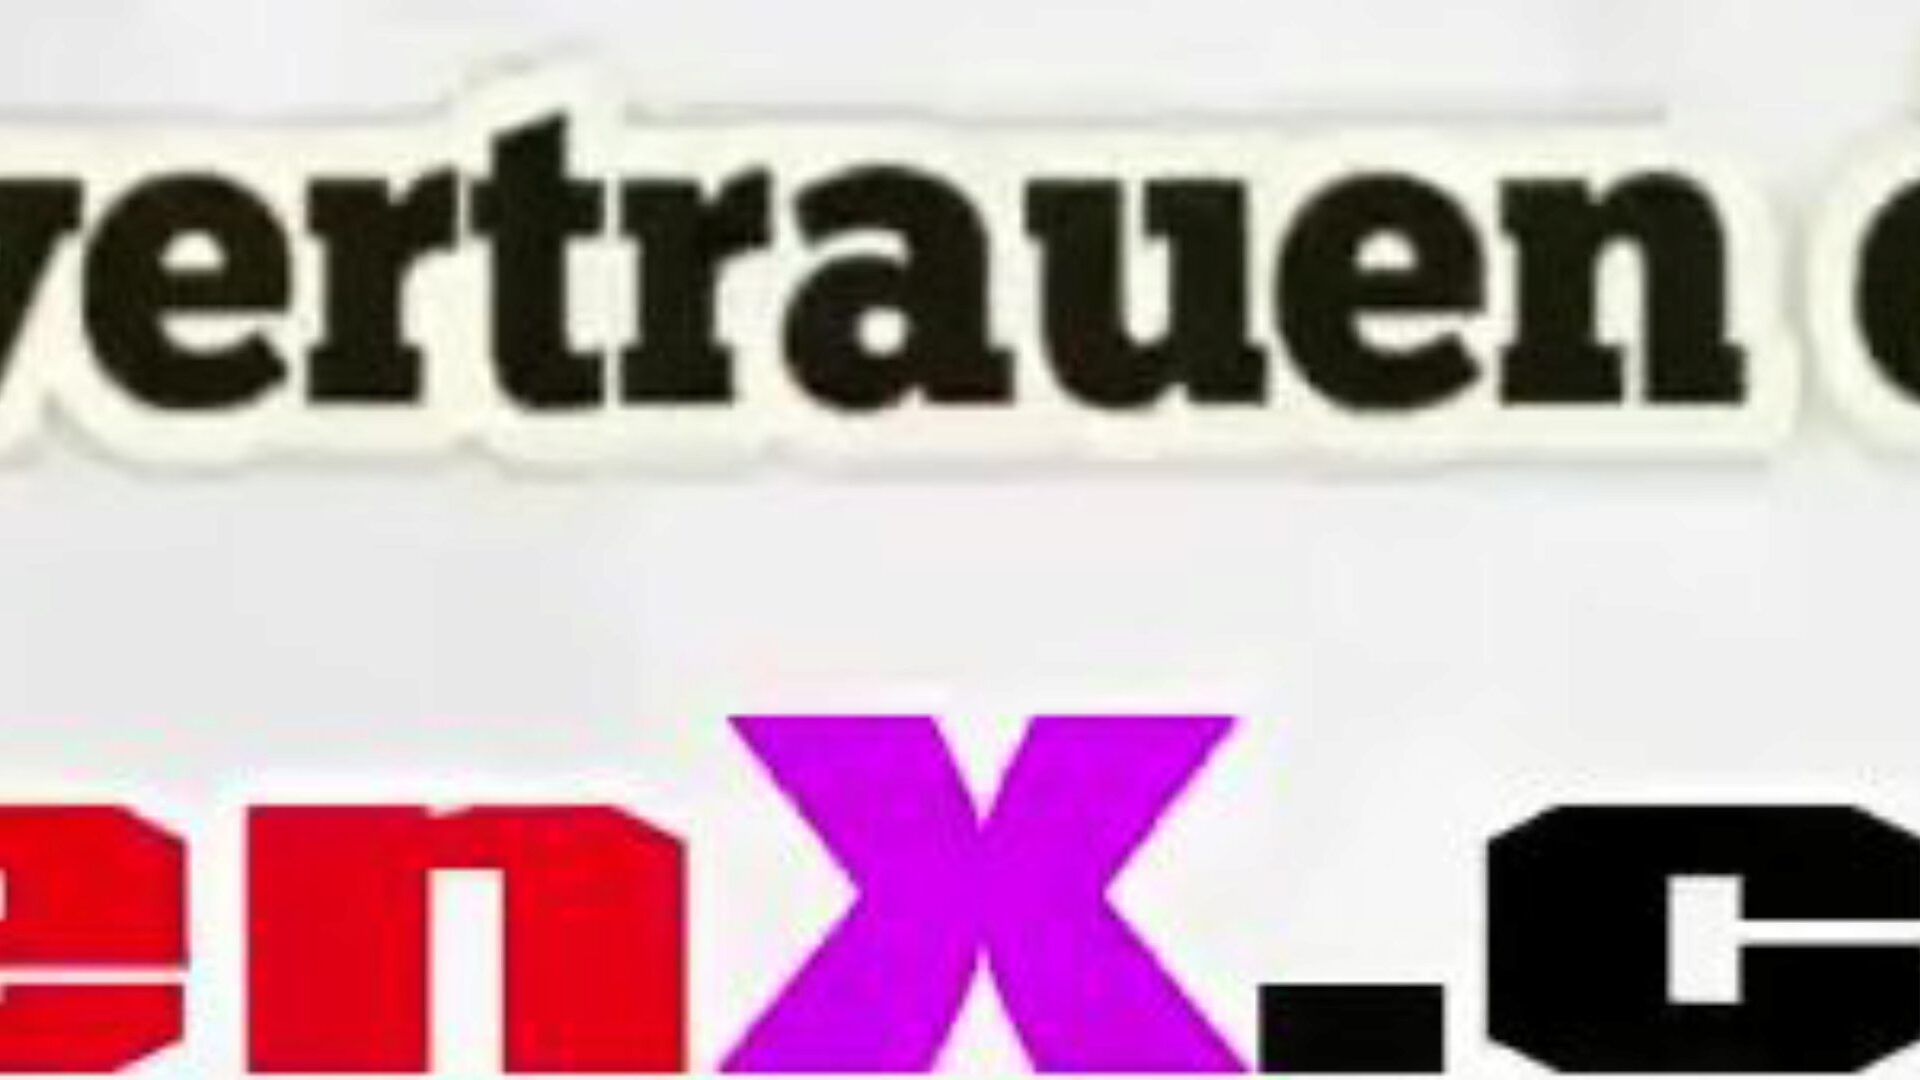 Sie Erpresste Ihn Ihre Muschi Zu Ficken, Porn 0a: xHamster Watch Sie Erpresste Ihn Ihre Muschi Zu Ficken episode on xHamster, the most excellent HD bang-out tube web page with tons of free German Deutsch & German mother I'd like to fuck pornography movie scenes